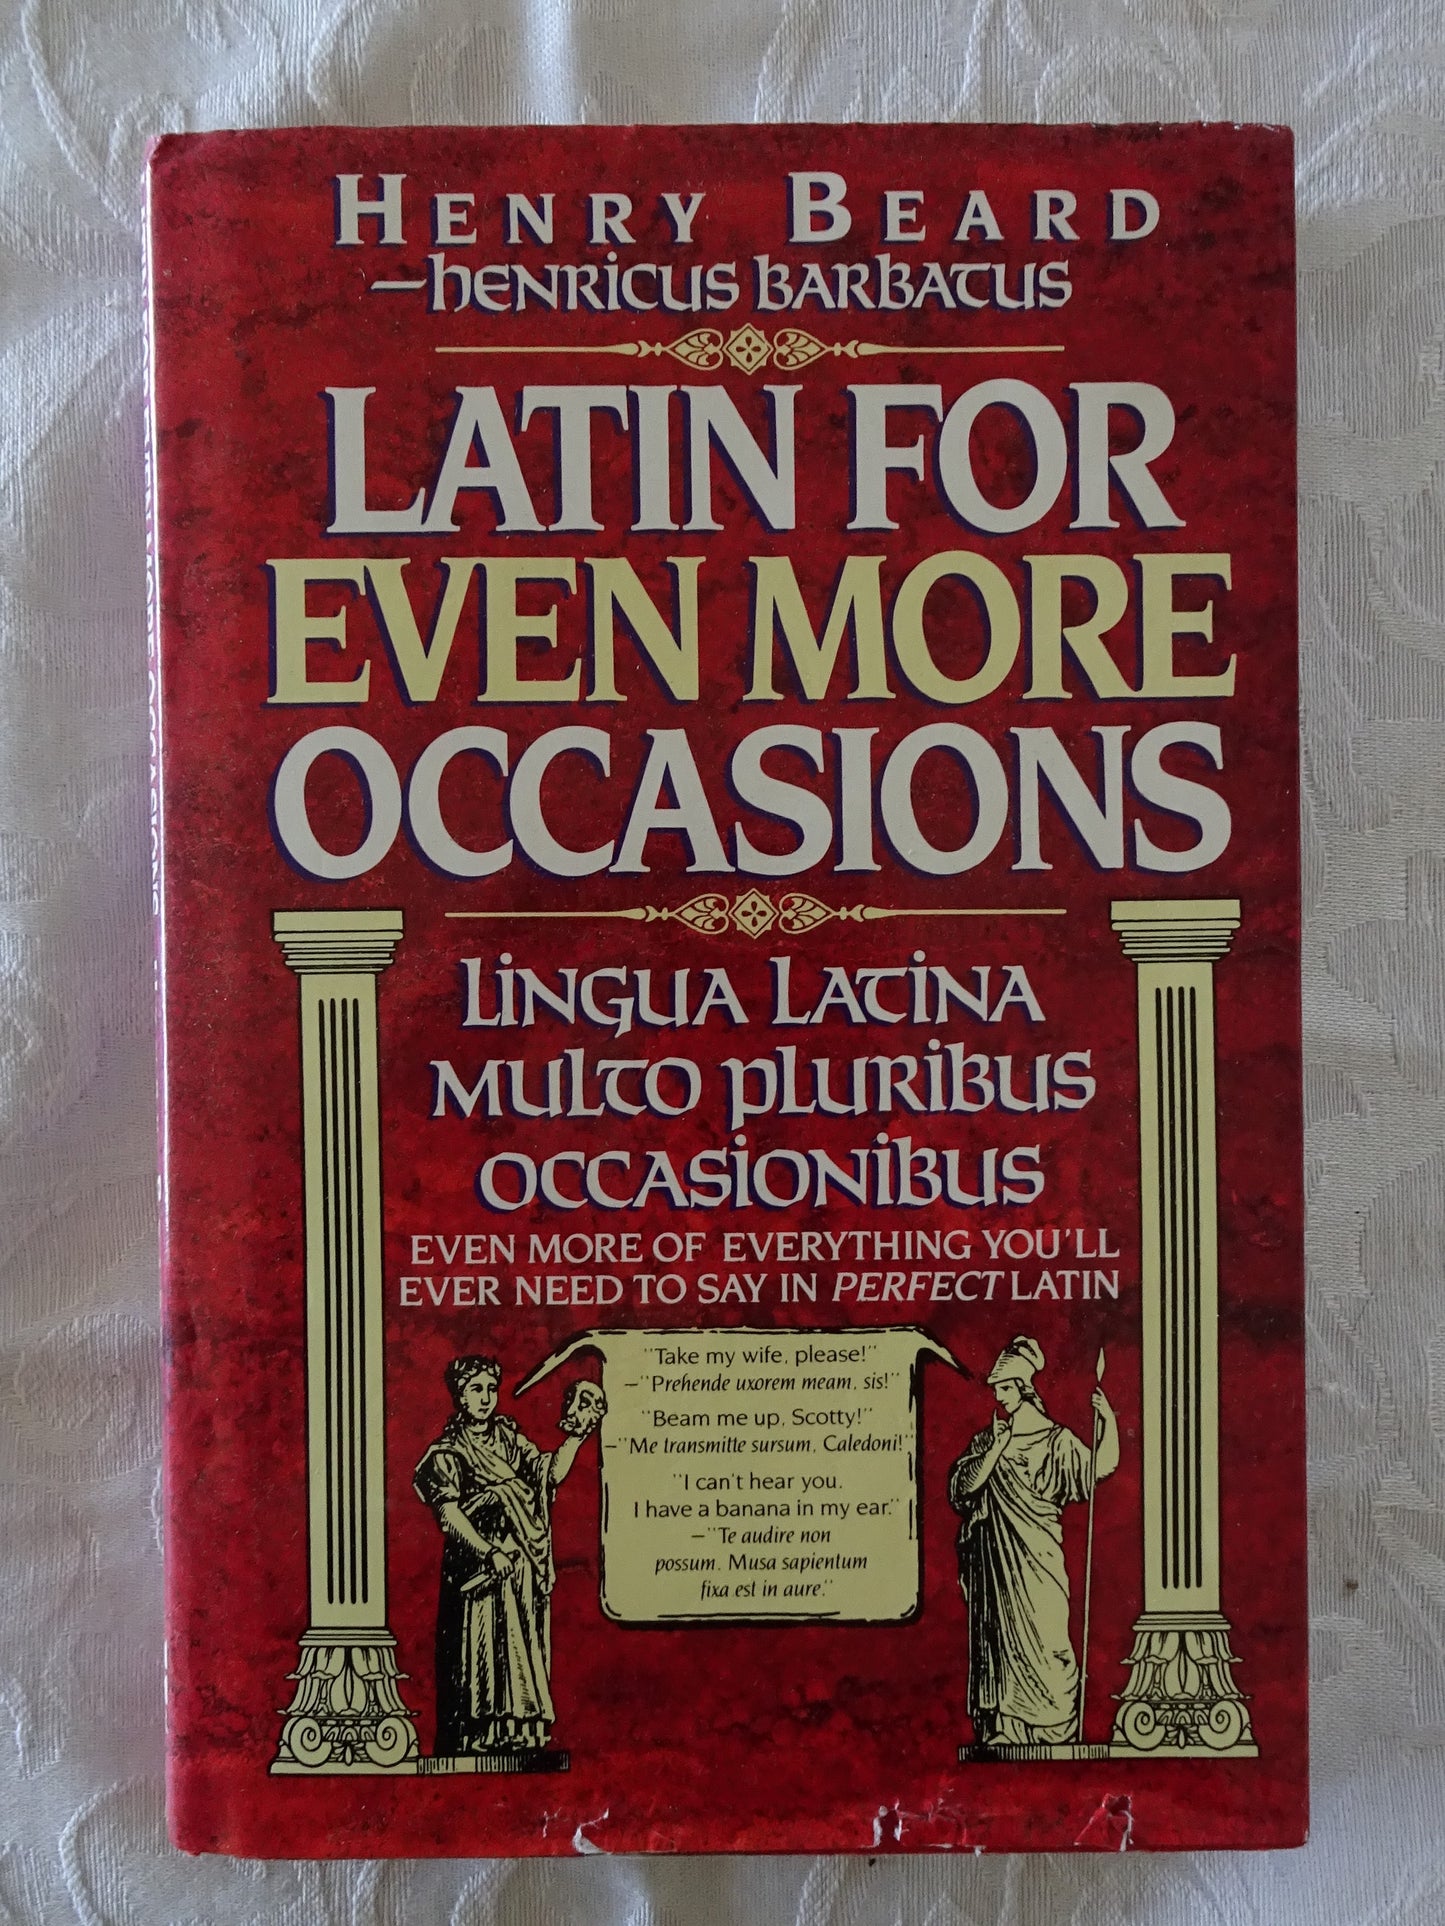 Latin For Even More Occasions by Henry Beard